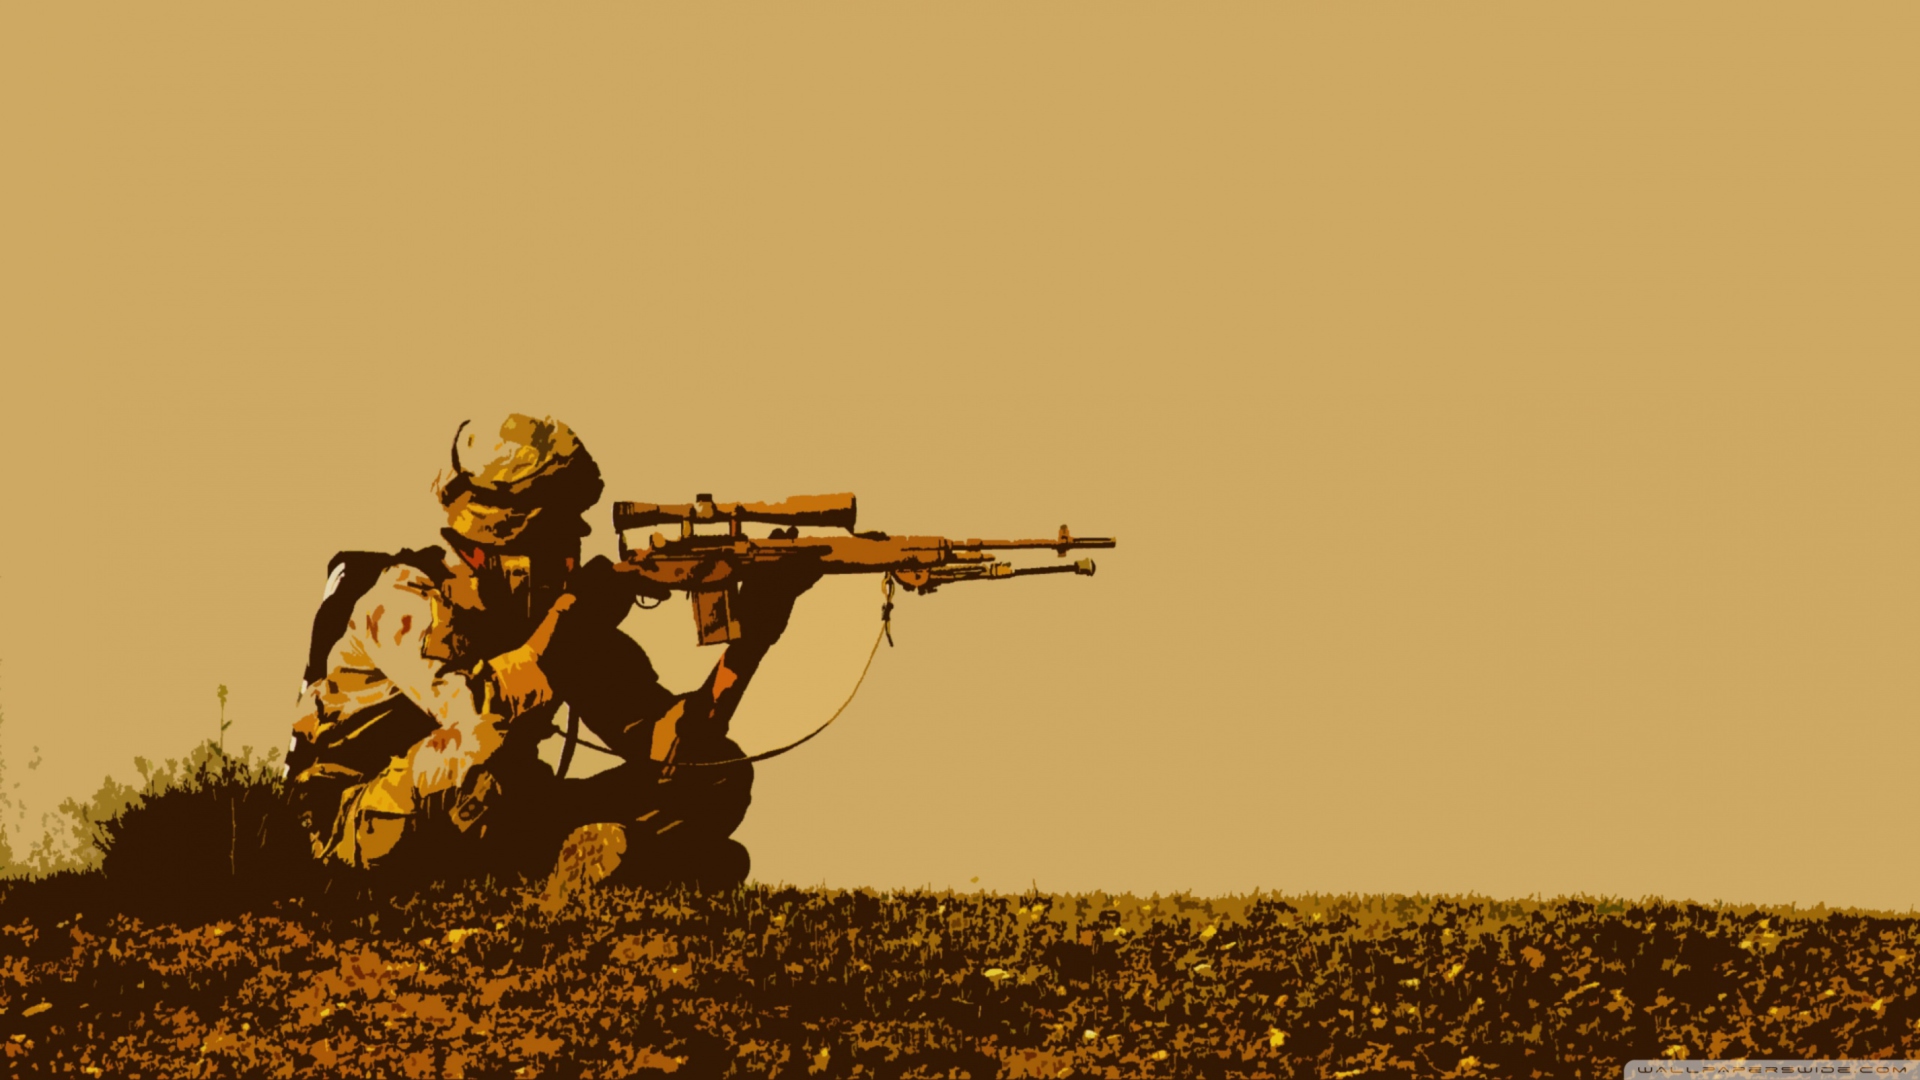 Army Soldier wallpaper 1920x1080